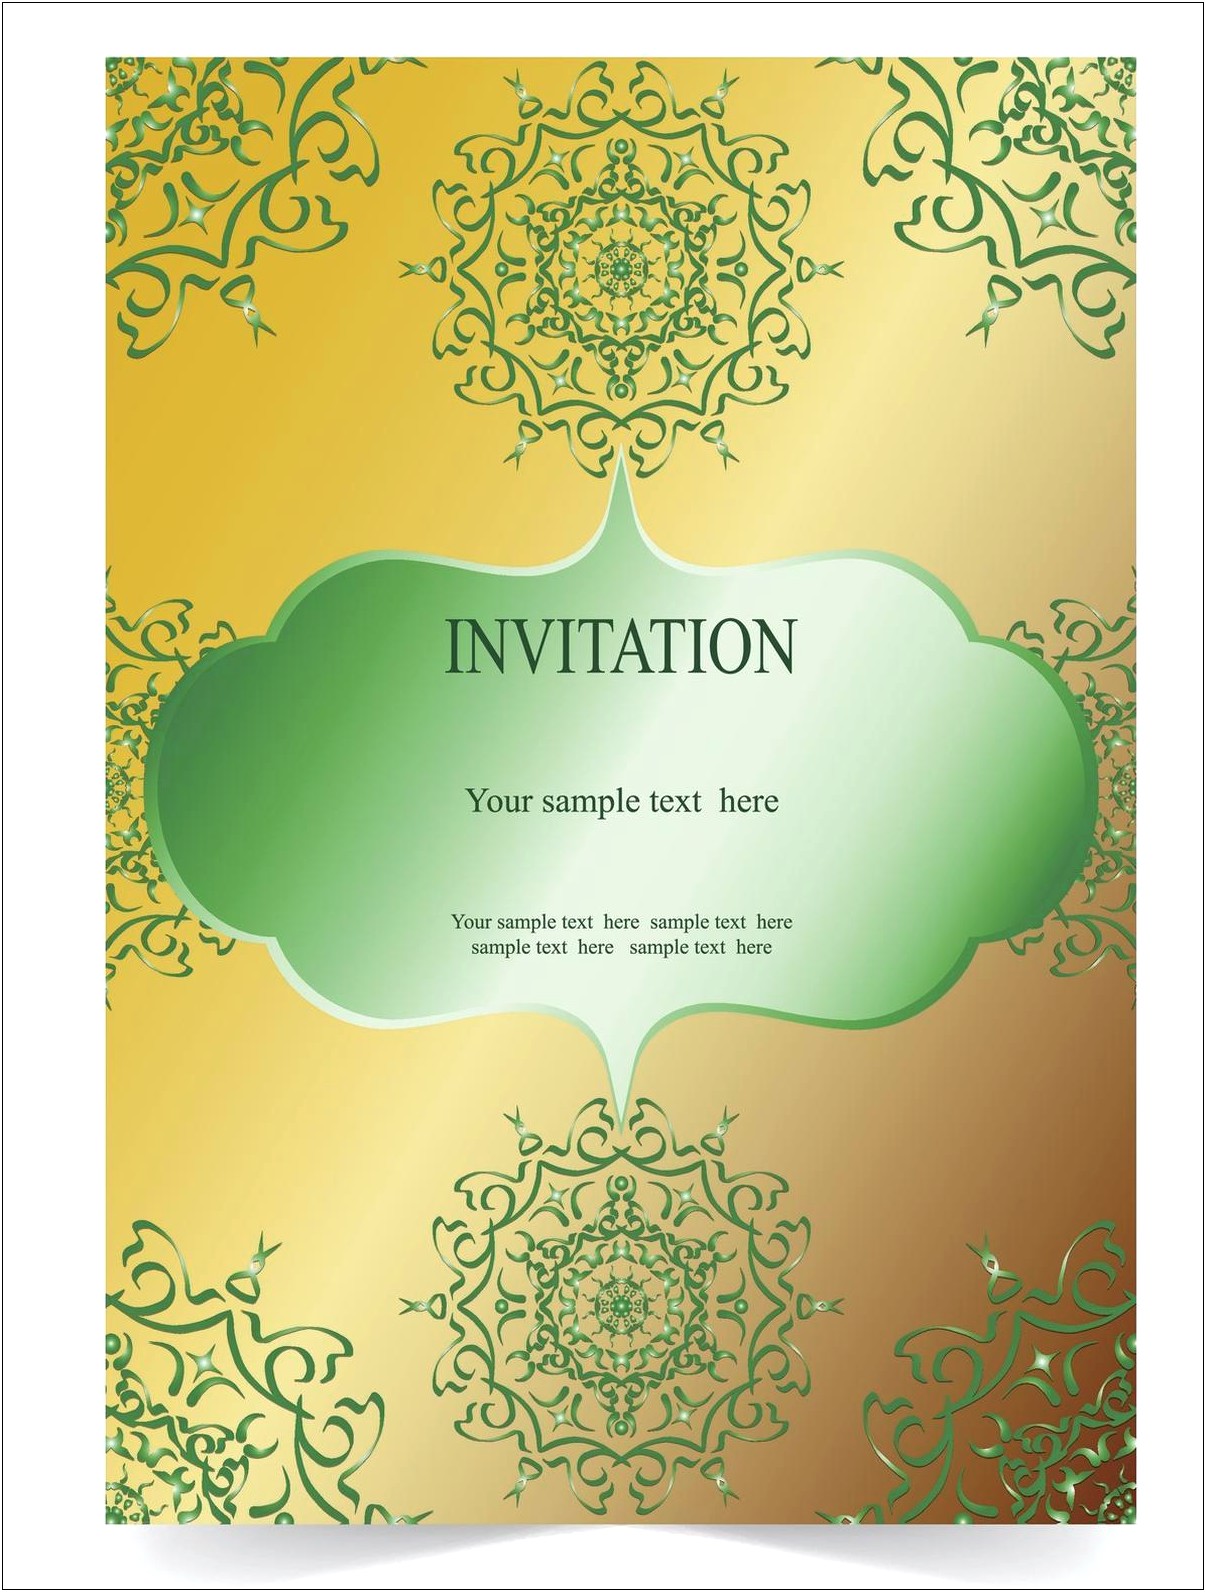 Wedding Invitation Message To Friends And Family